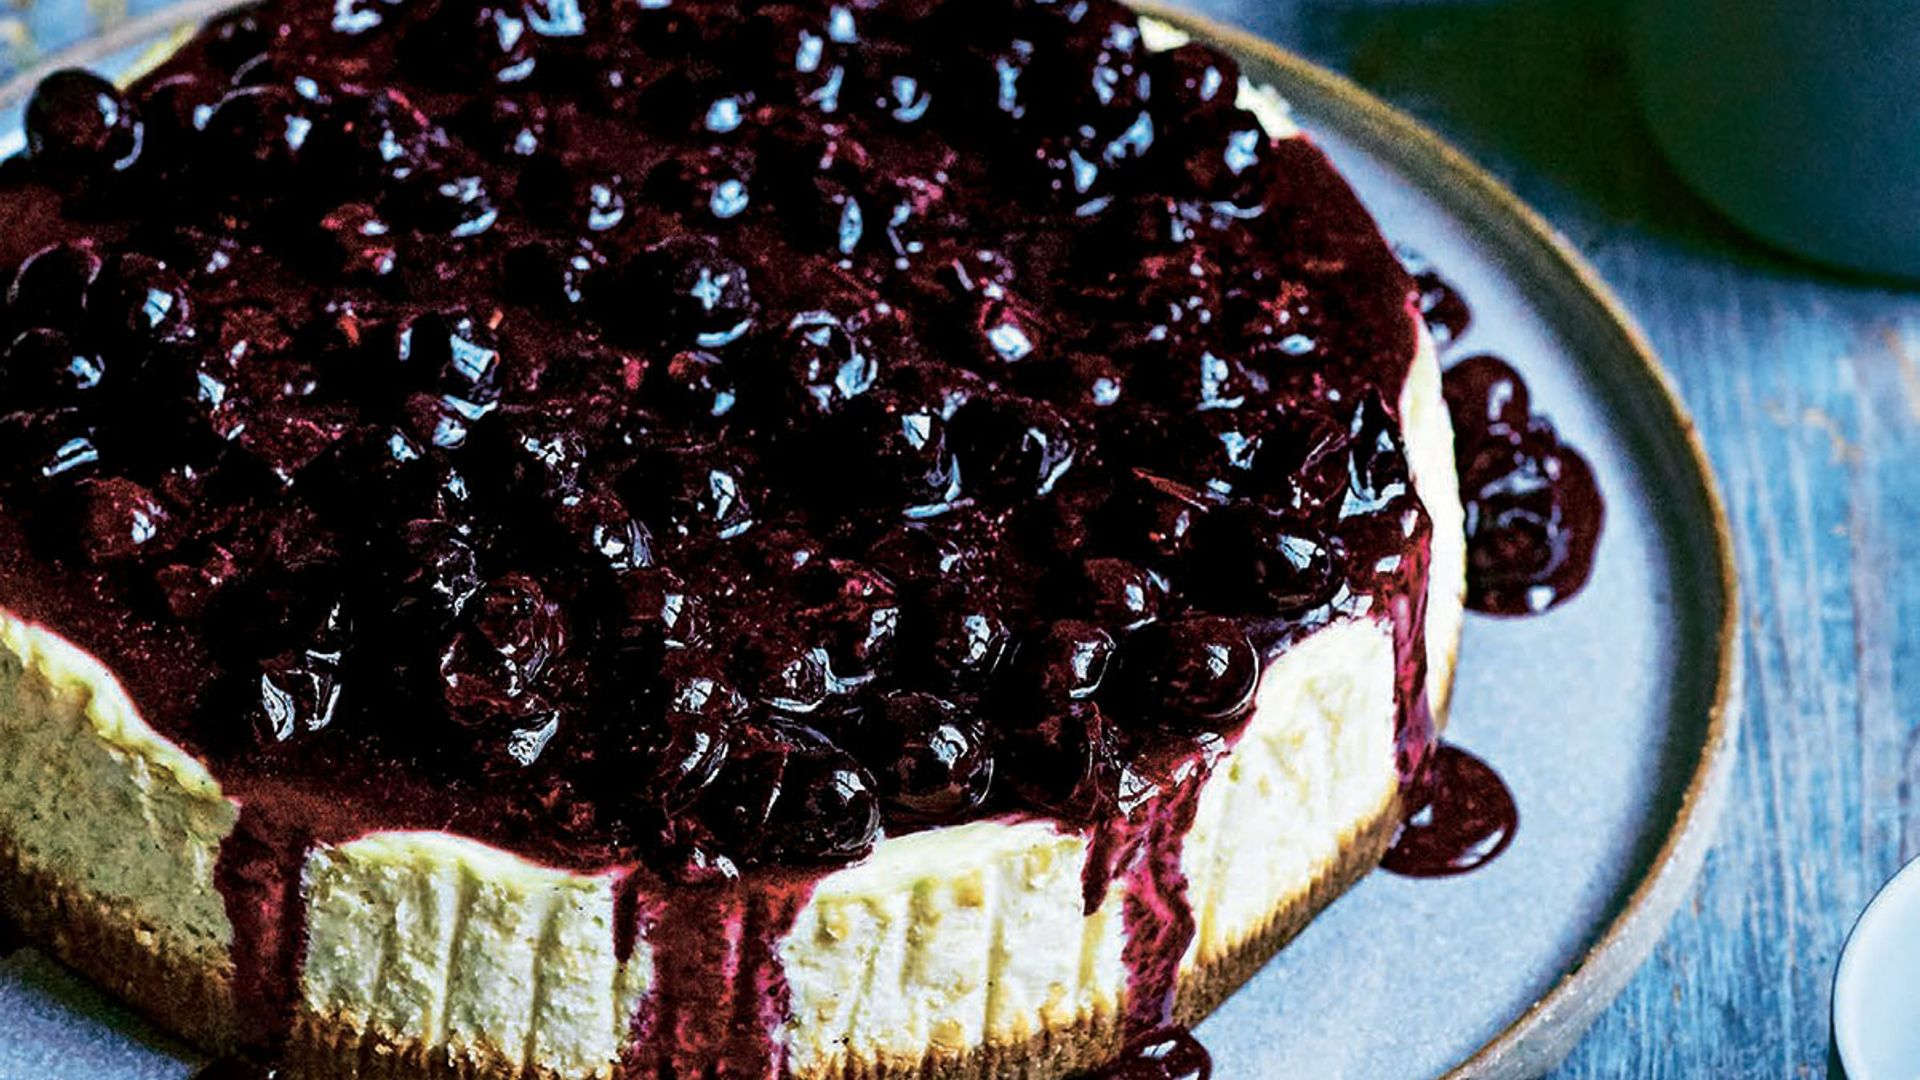 This summer fruit showstopper is a cheesecake lover's dream -  AND it's a royal favourite